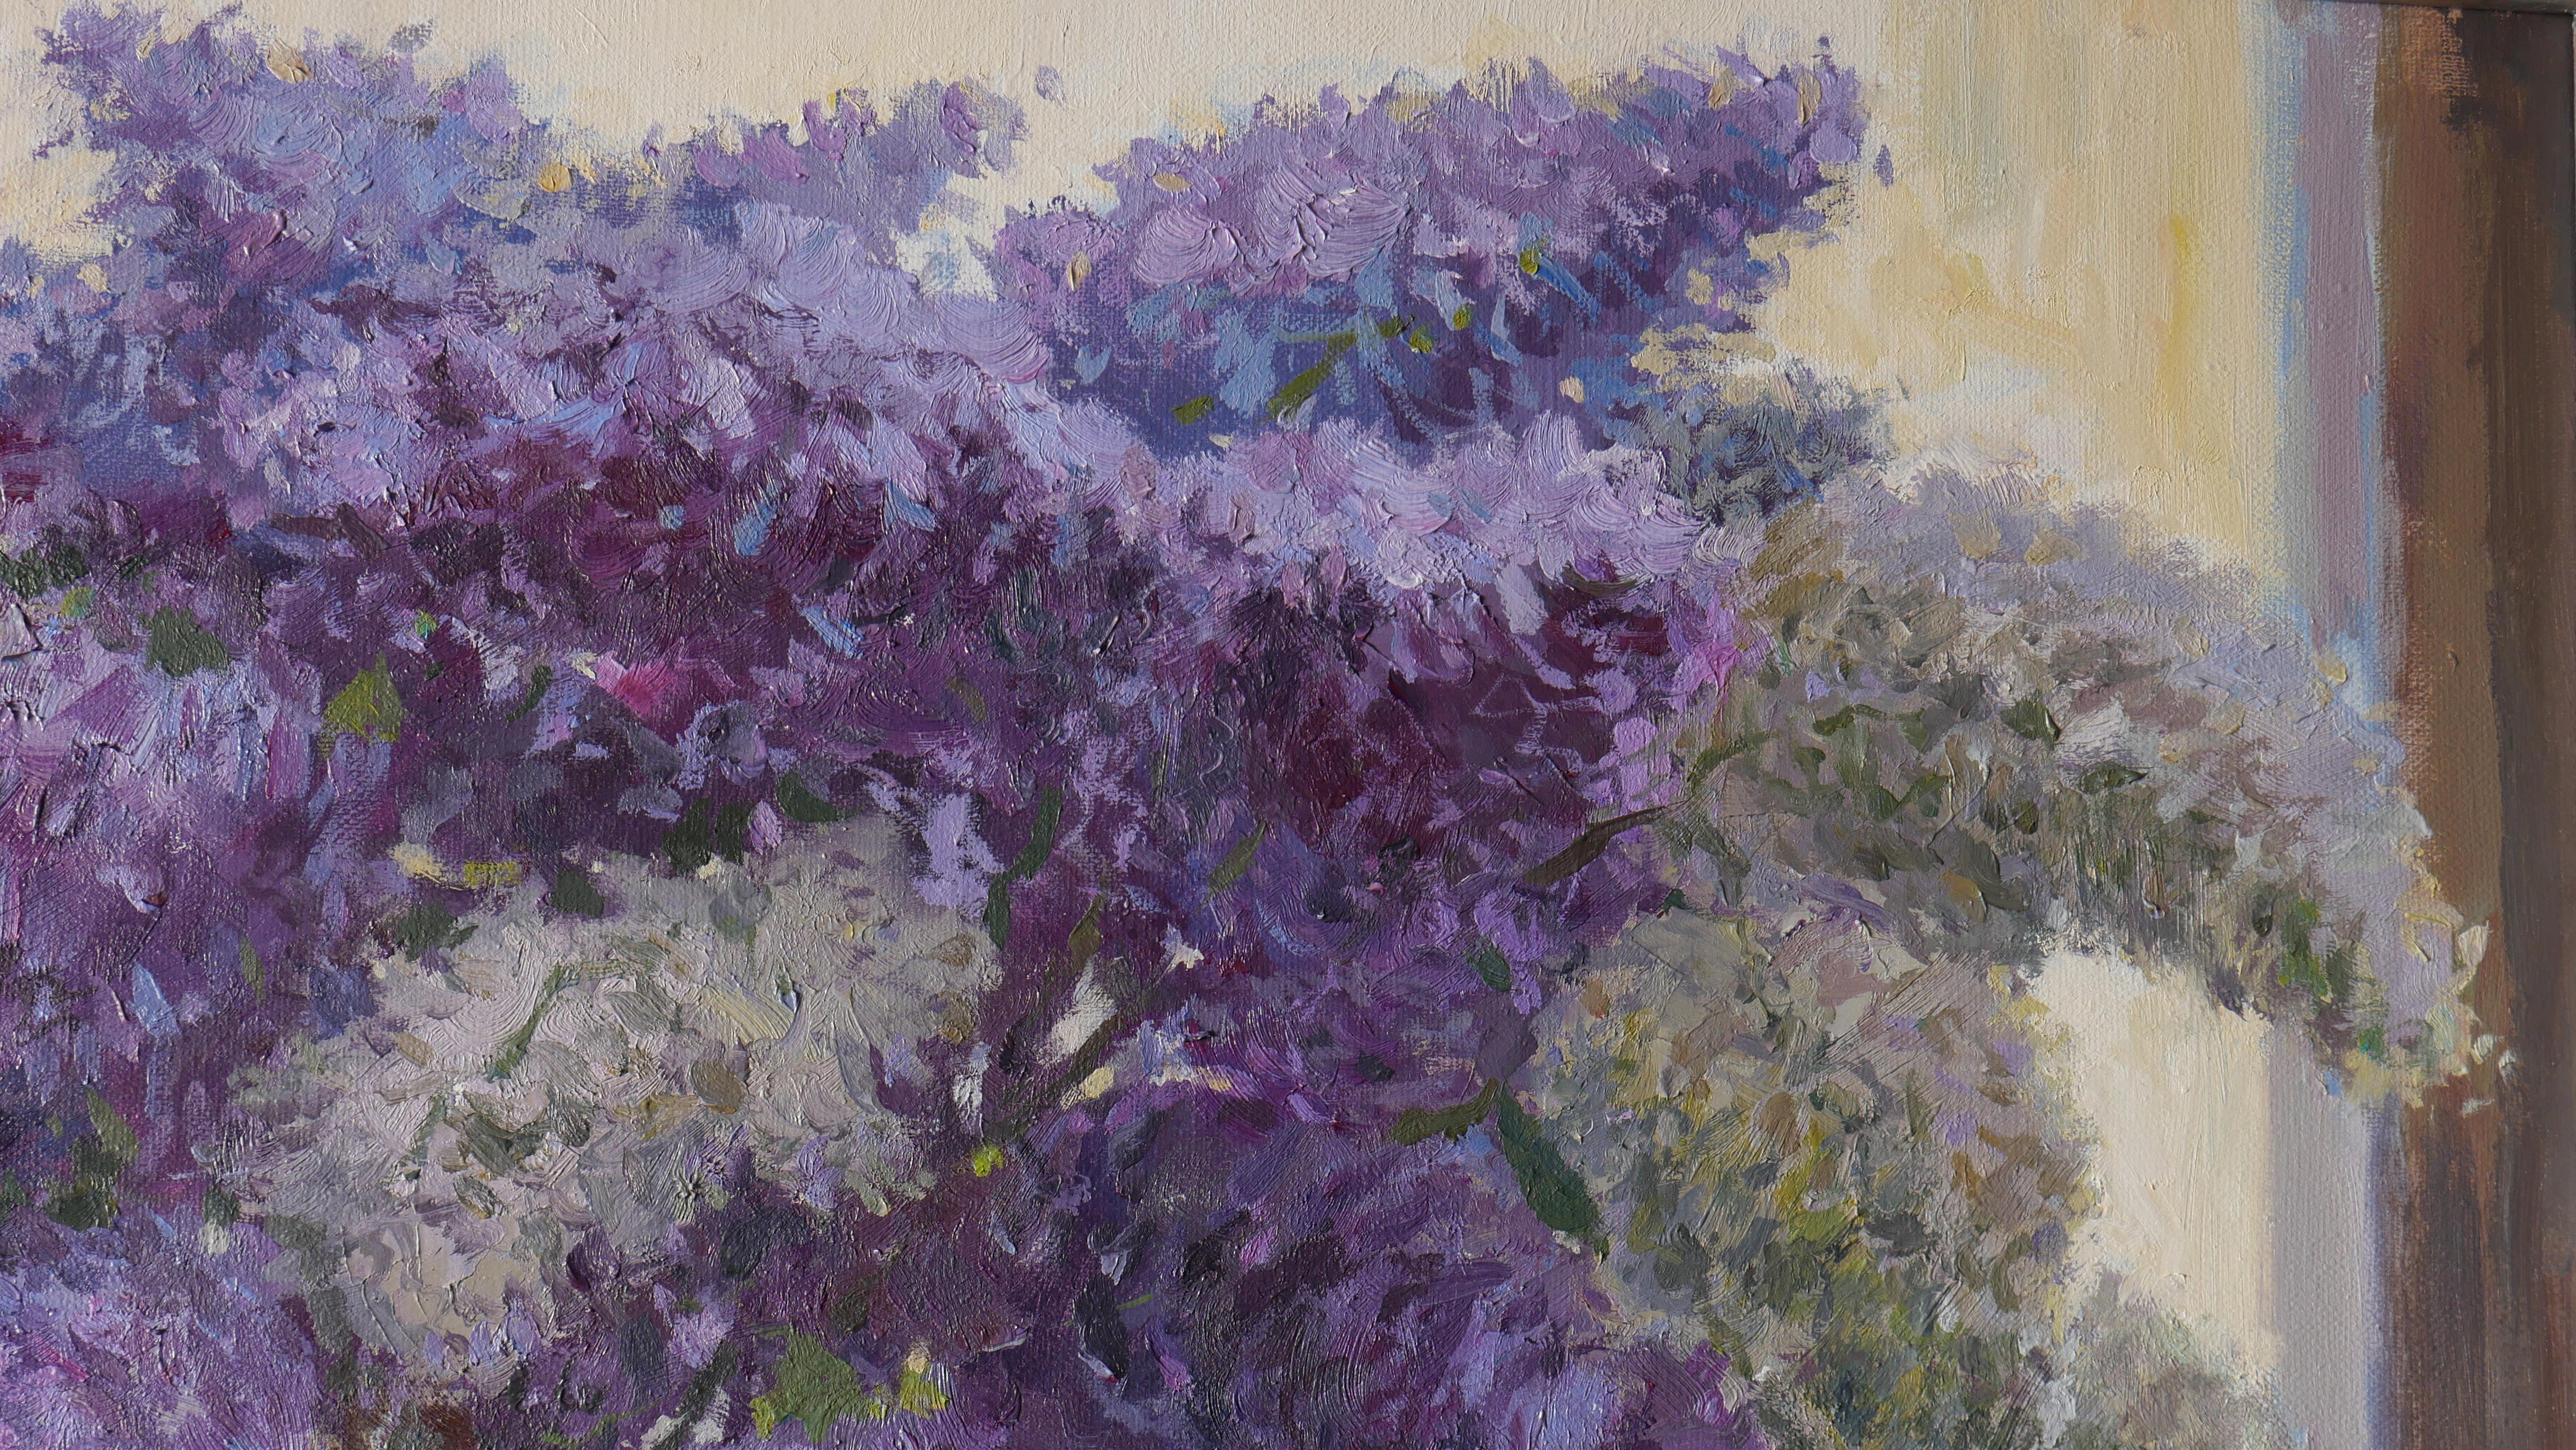 The Lush Bouquet Of Lilacs Near The Light Window - lilacs still life painting For Sale 1